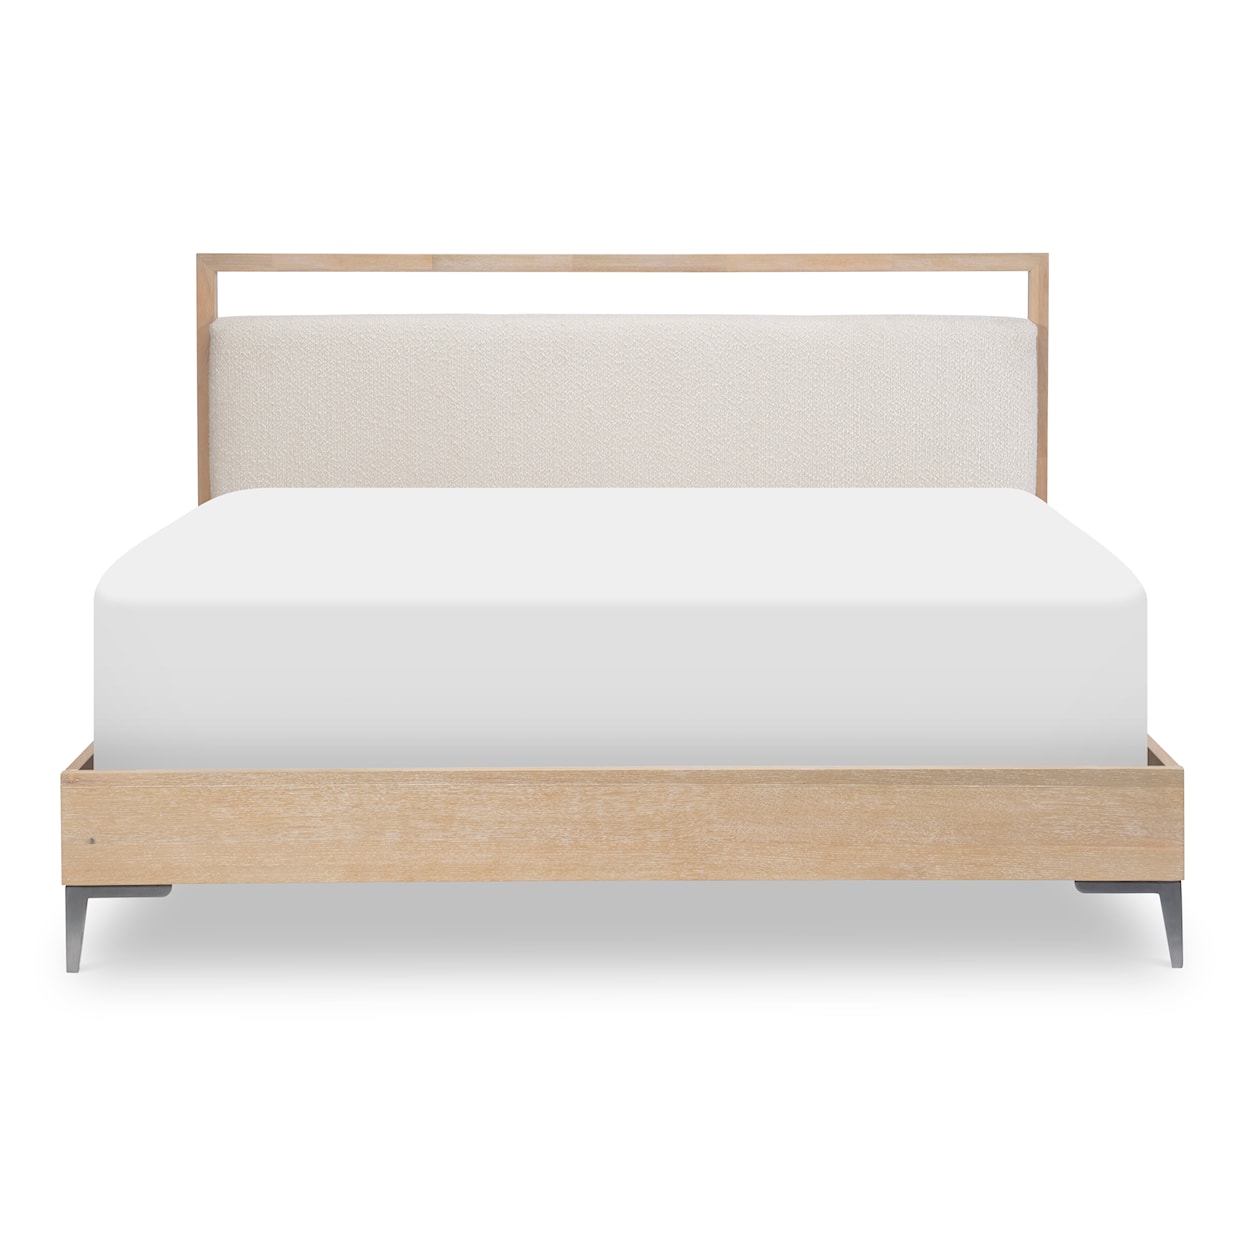 Legacy Classic Biscayne Upholstered Queen Bed